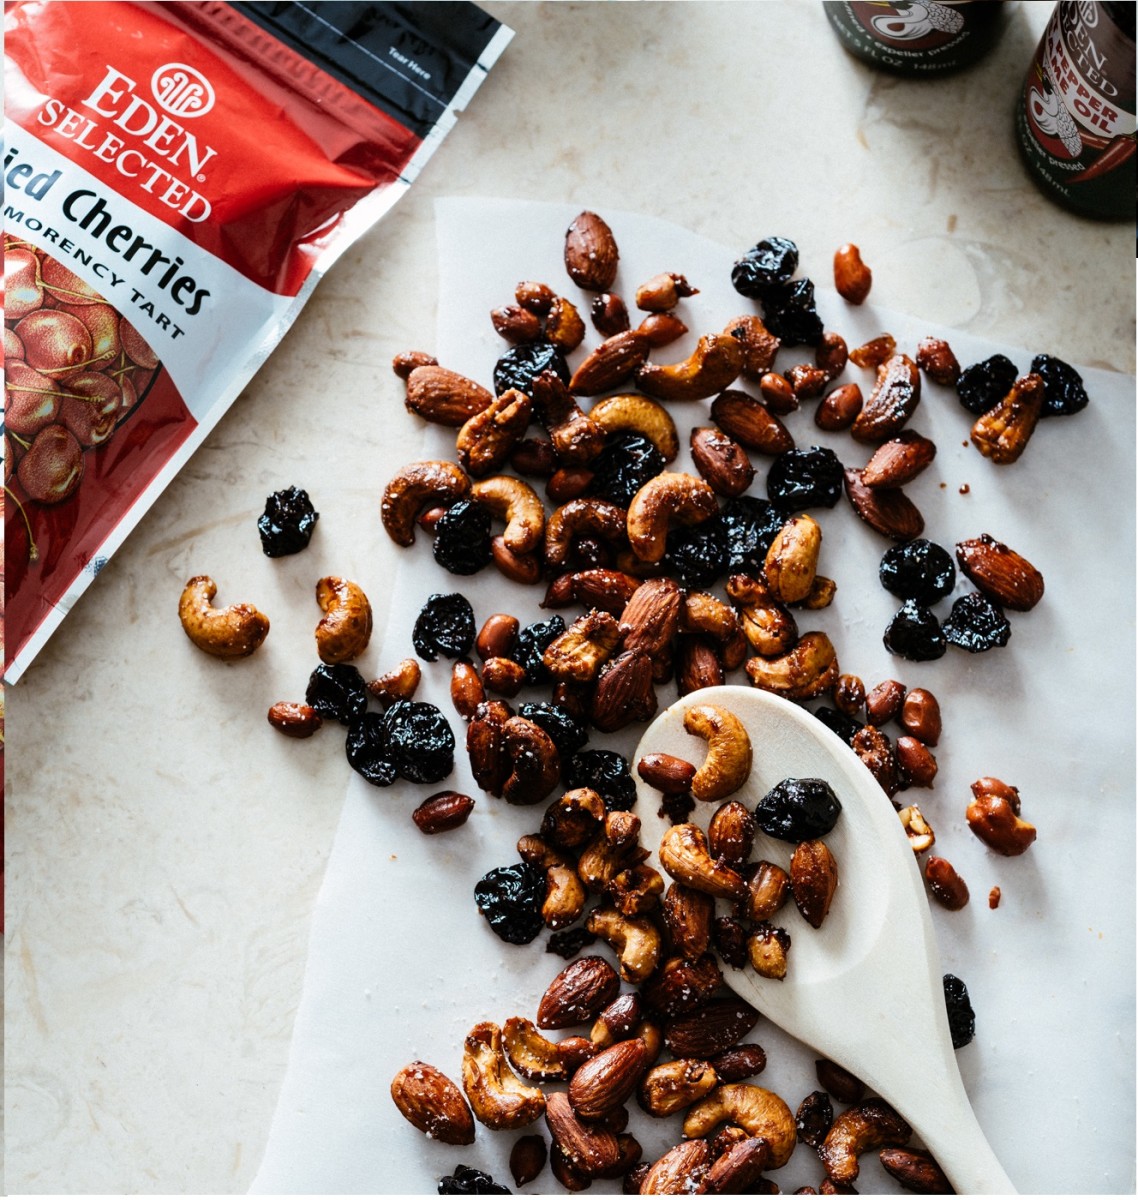 Baked Asian Nut Mix with Montmorency Cherries